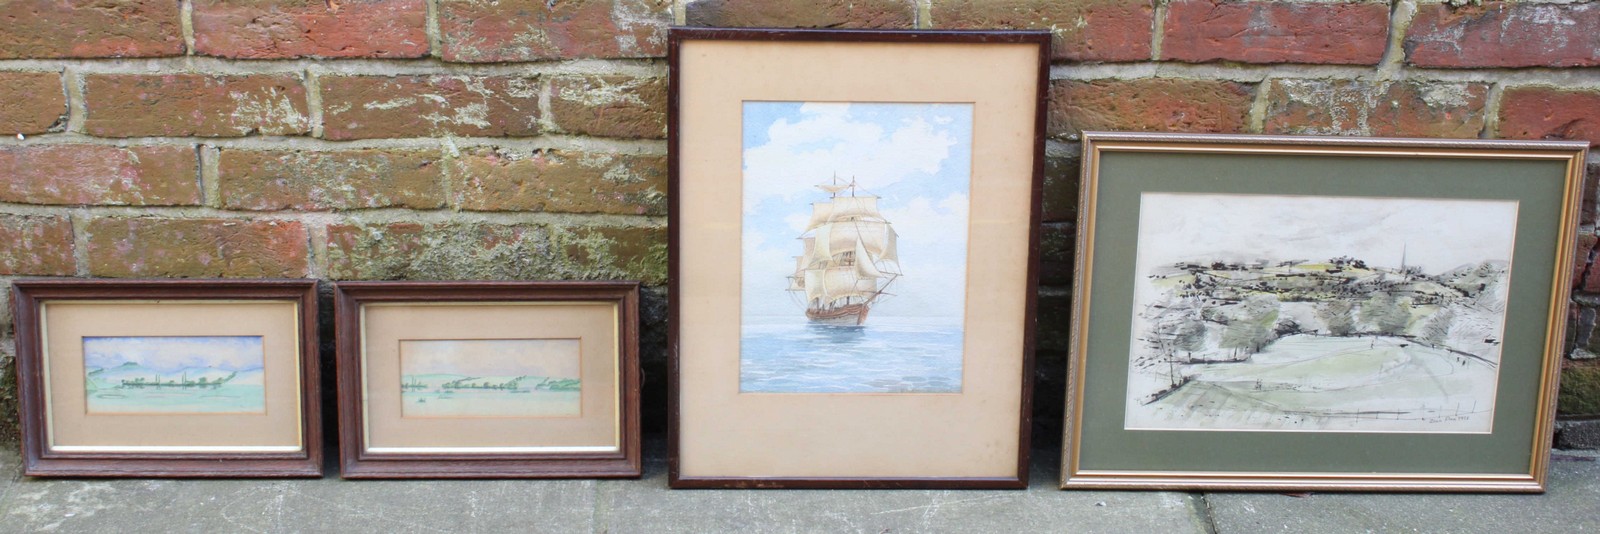 Four various watercolour paintings including an E.L. Banwell seascape study depicting a tall ship in